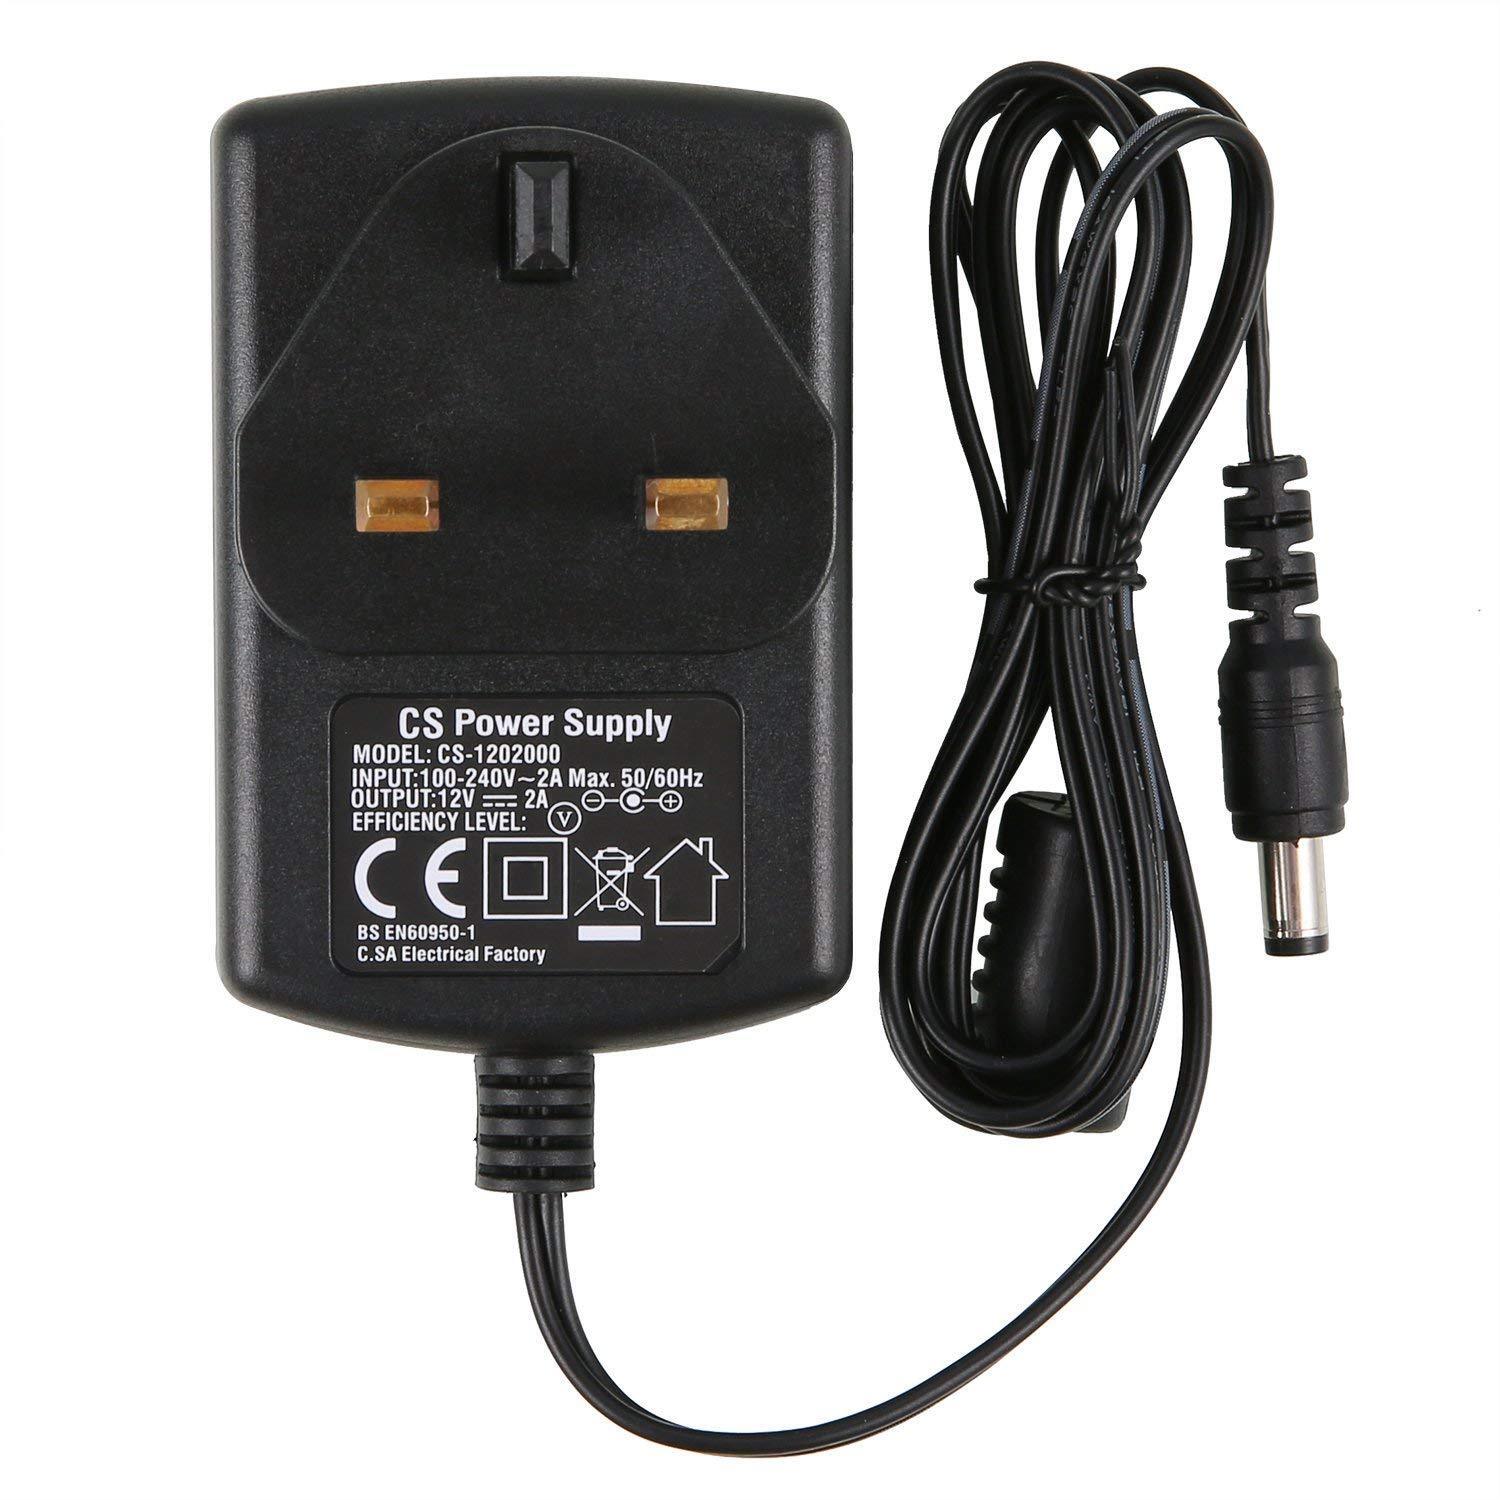 SANNCE 1pcs 2000mA Max AC to DC 12V Power Adapter Supply for Security DVR CCTV £10 post thumbnail image